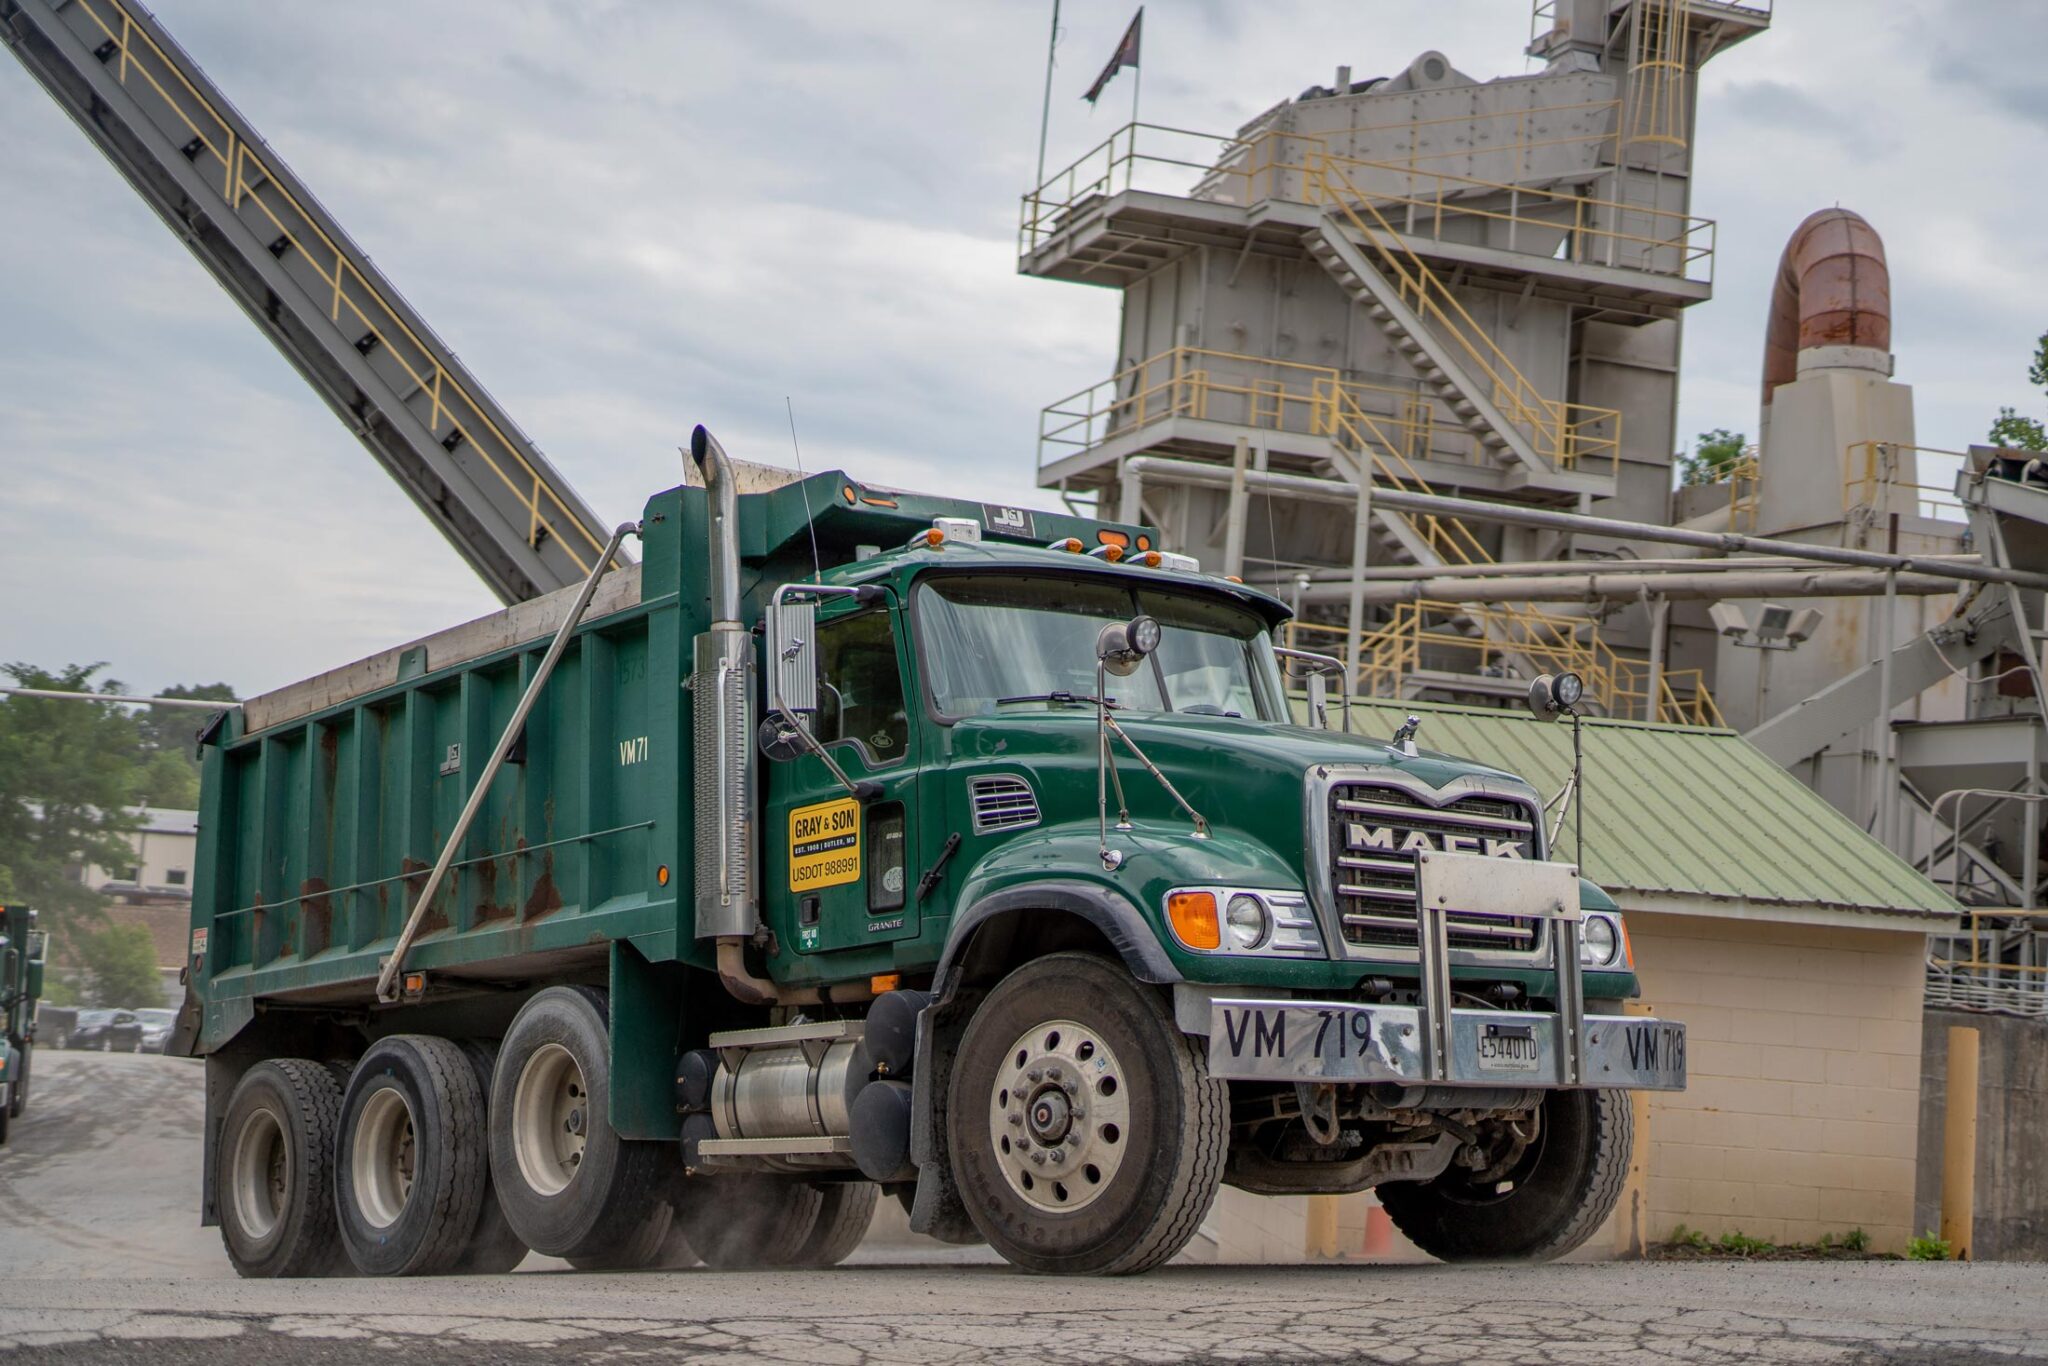 A green construction mack truck owned by Gray & Son a leading site and development contractor in Maryland.